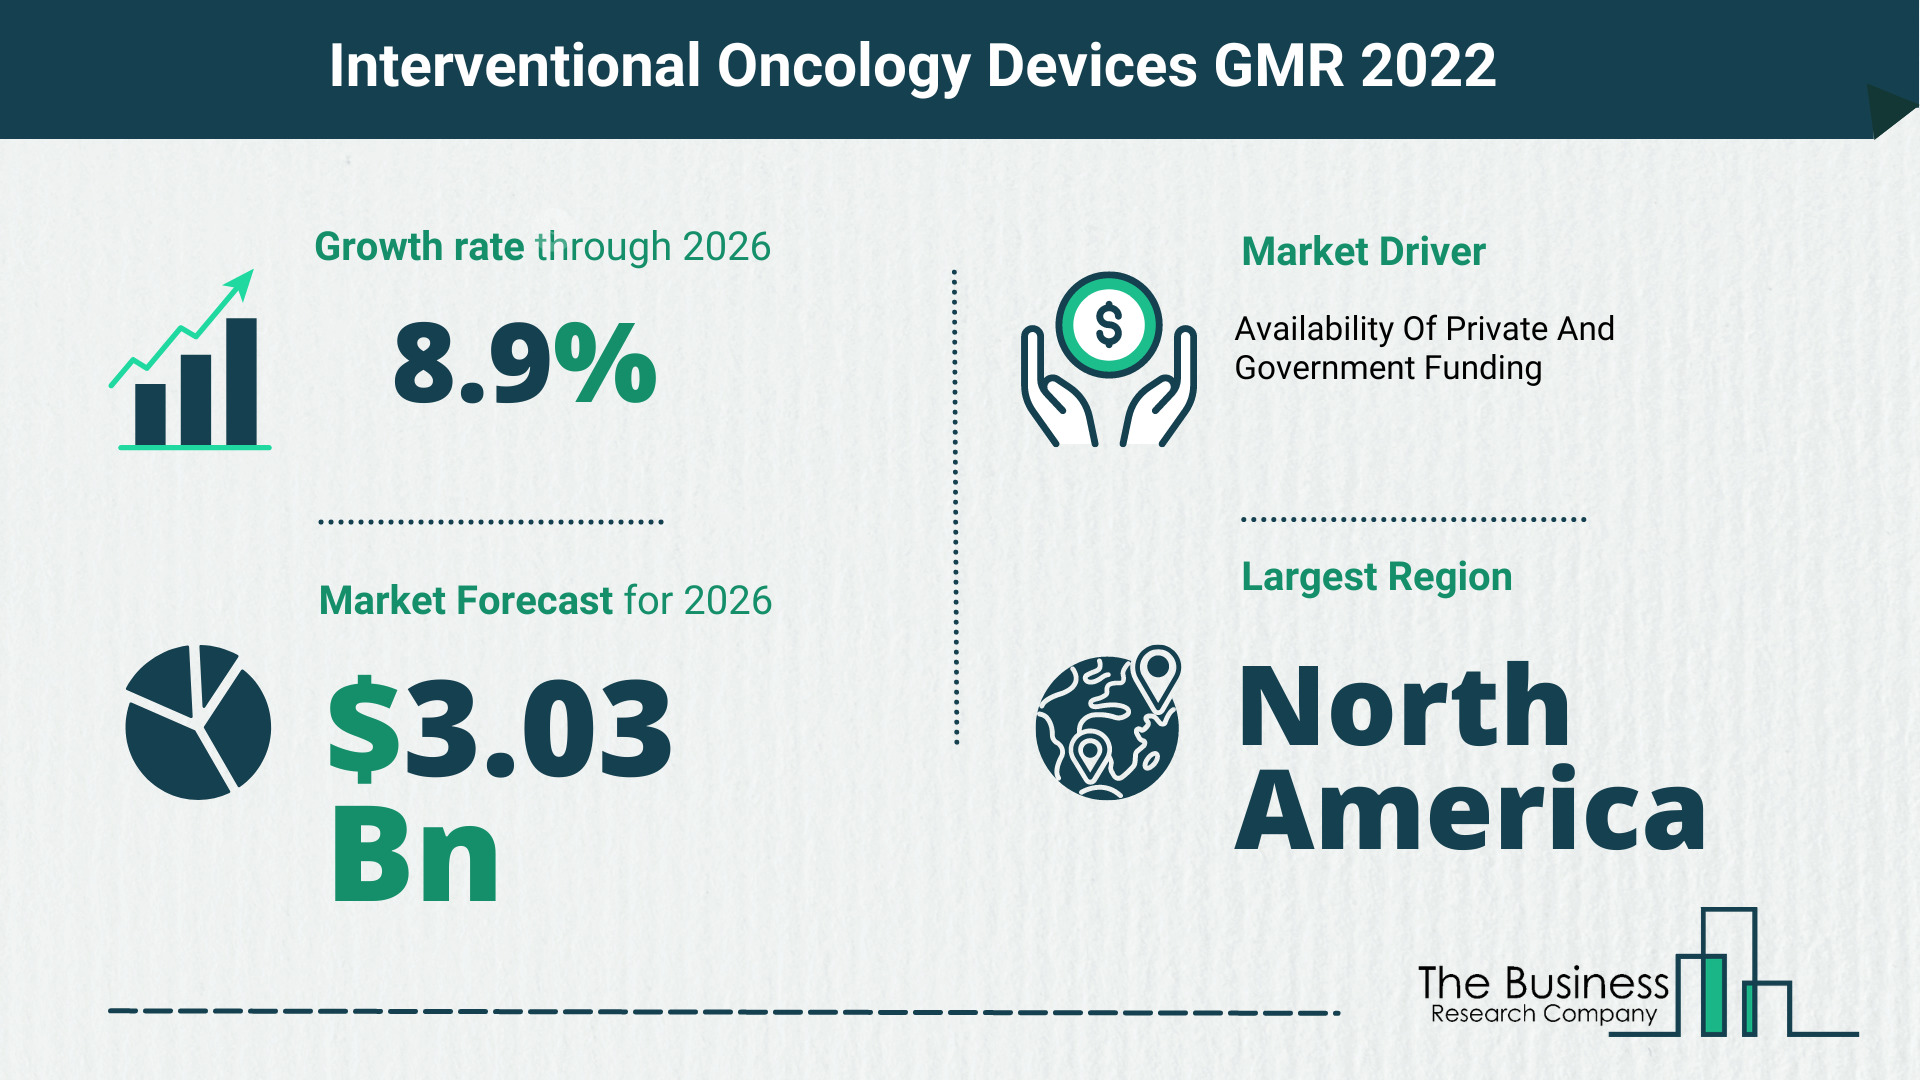 The Interventional Oncology Devices Market Share, Market Size, And Growth Rate 2022